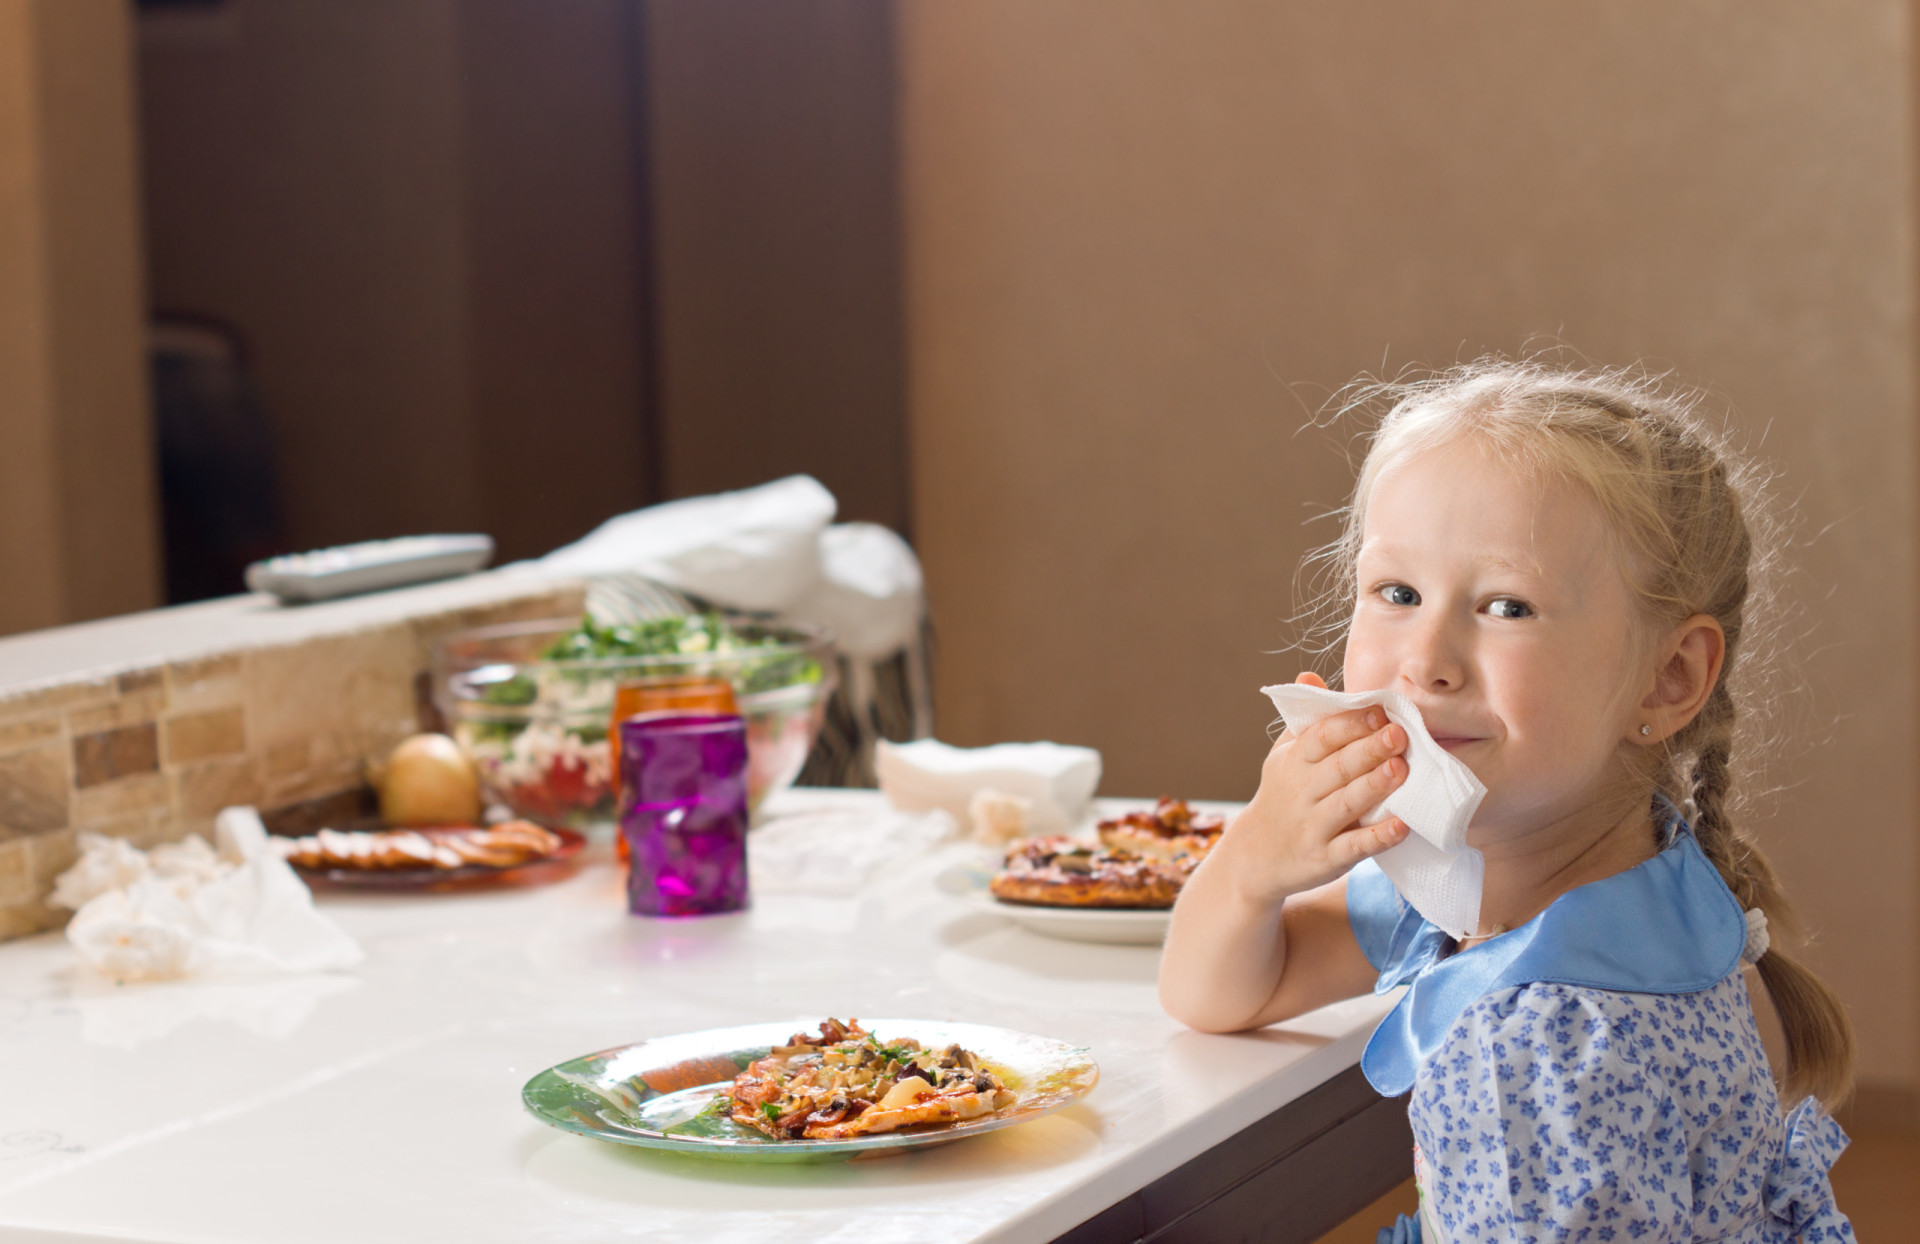 <p>Teaching kids to use utensils and chew with their mouths closed might seem trivial, but it's about more than just eating. Table manners reflect consideration for others.</p><p>You may also like:<a href="https://www.starsinsider.com/n/129145?utm_source=msn.com&utm_medium=display&utm_campaign=referral_description&utm_content=588009en-en"> The most interesting facts about death </a></p>